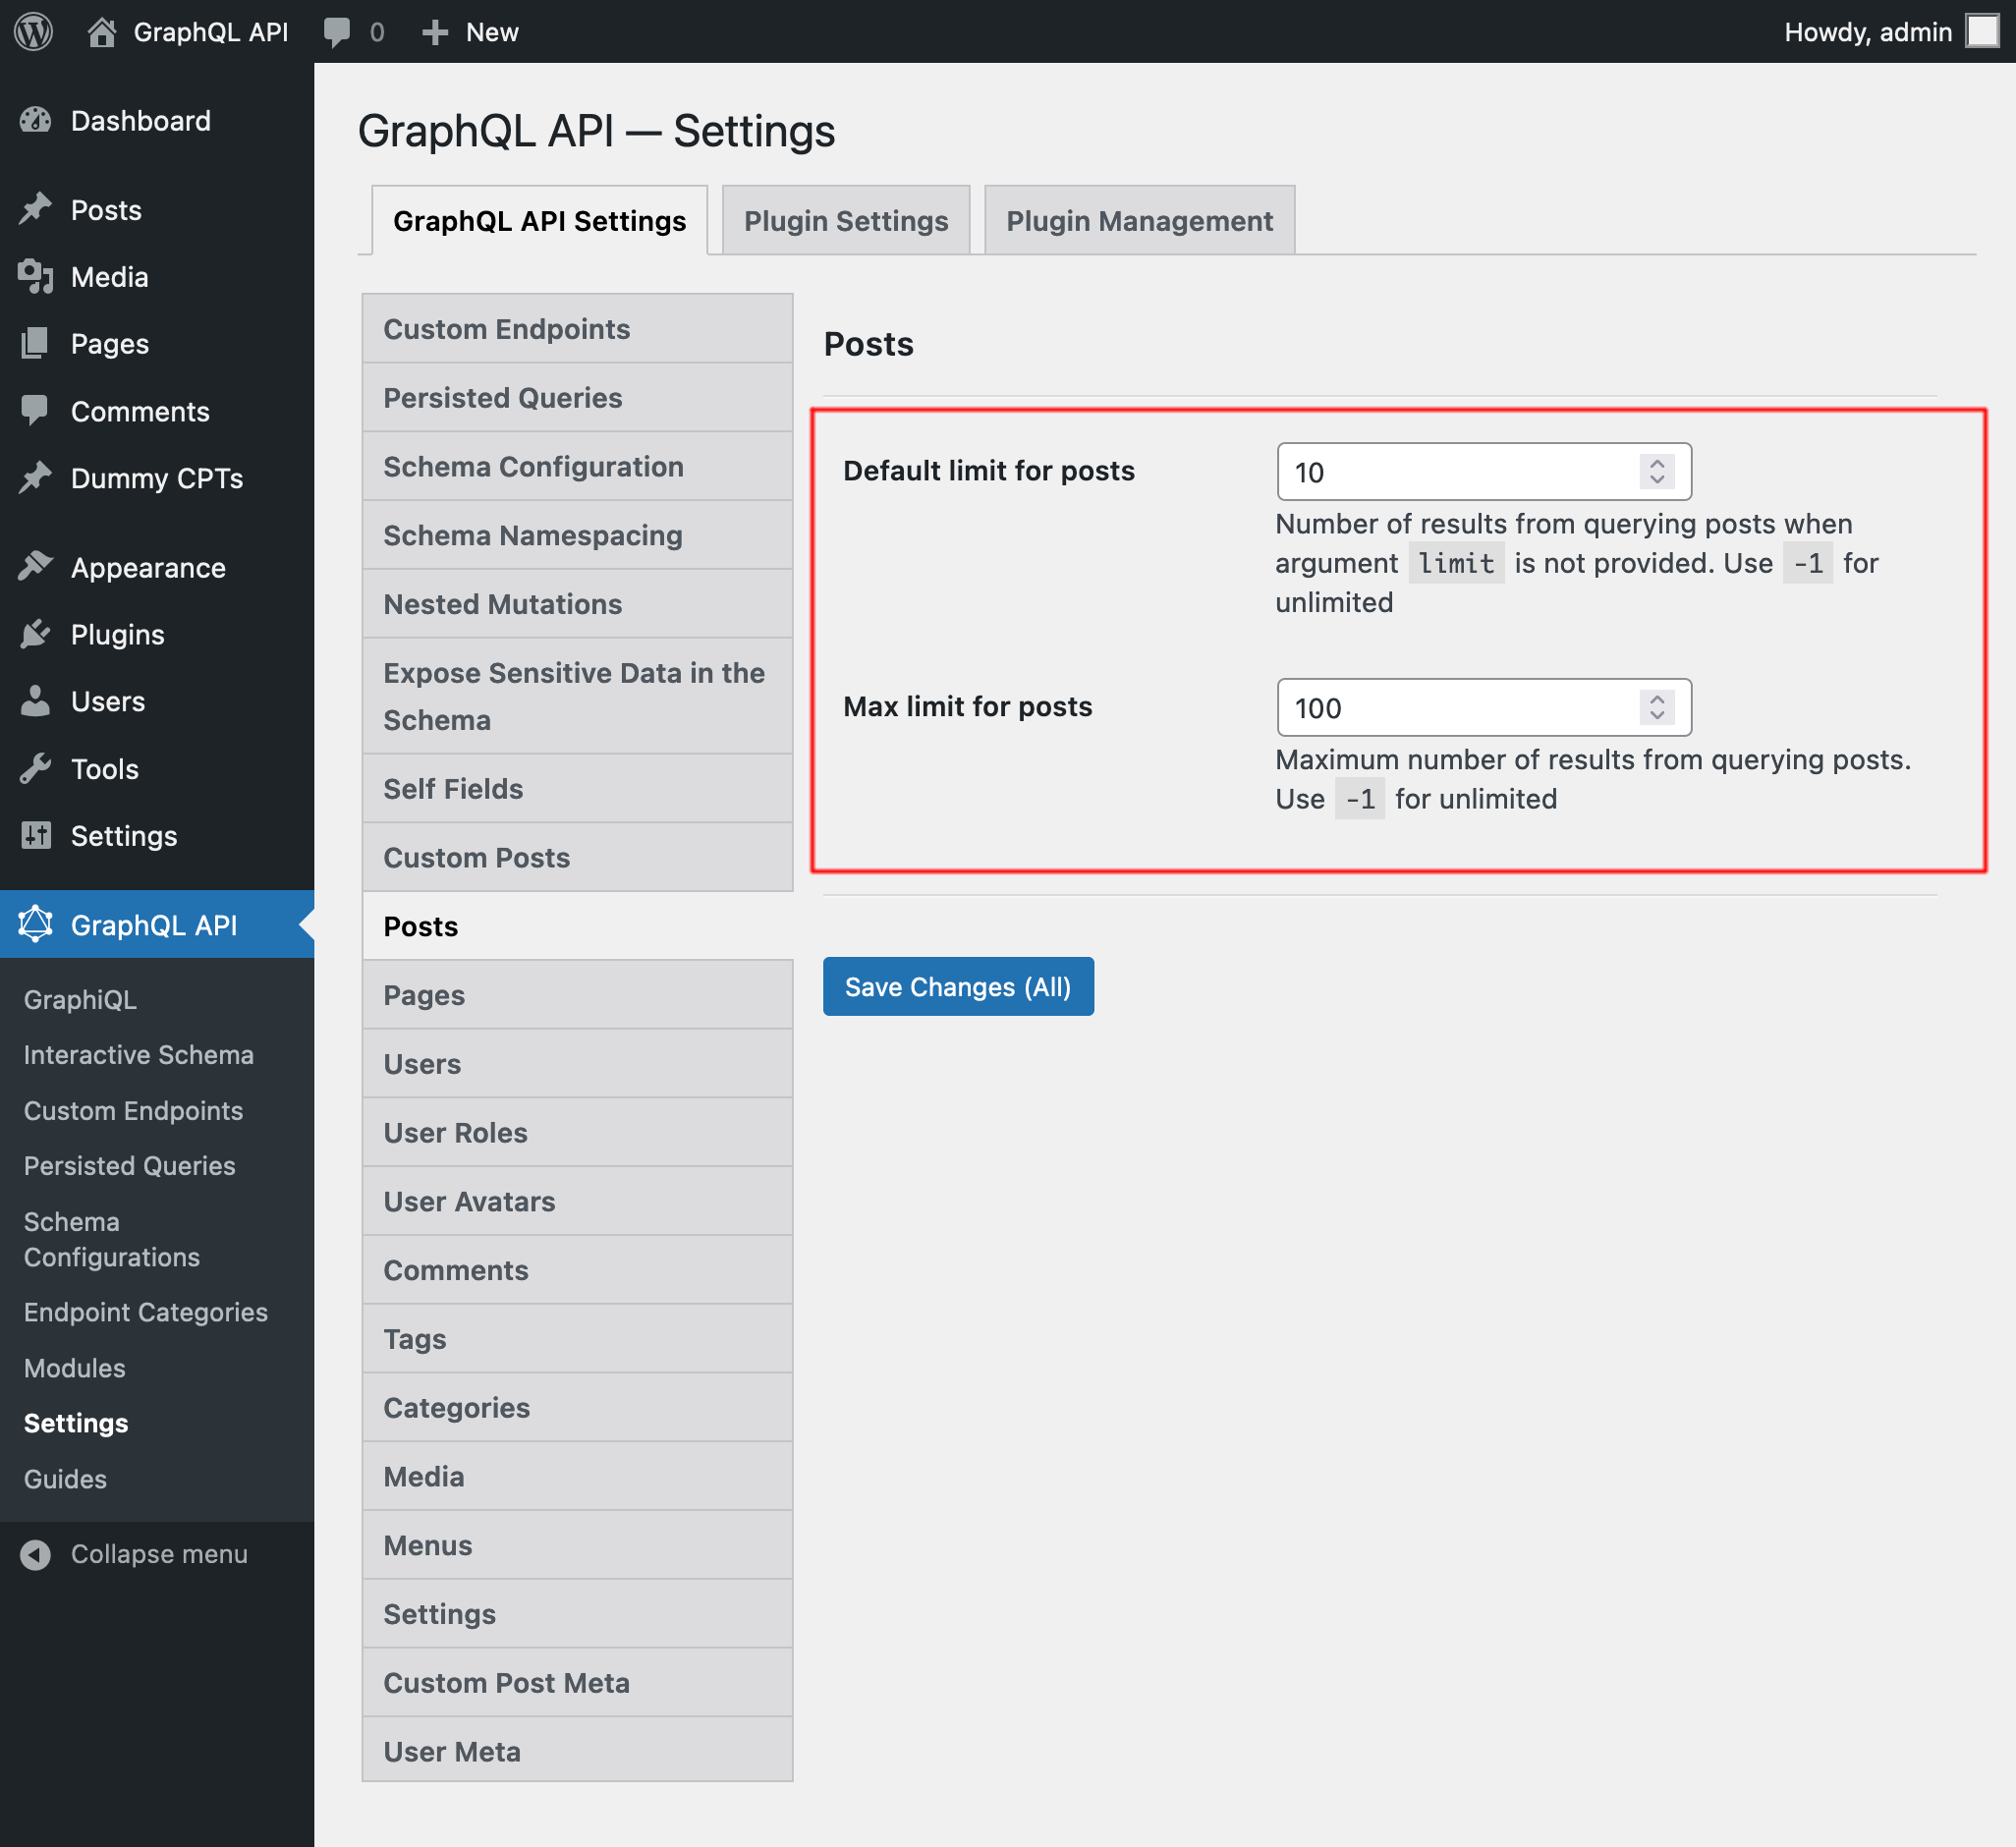 Settings for Post limits